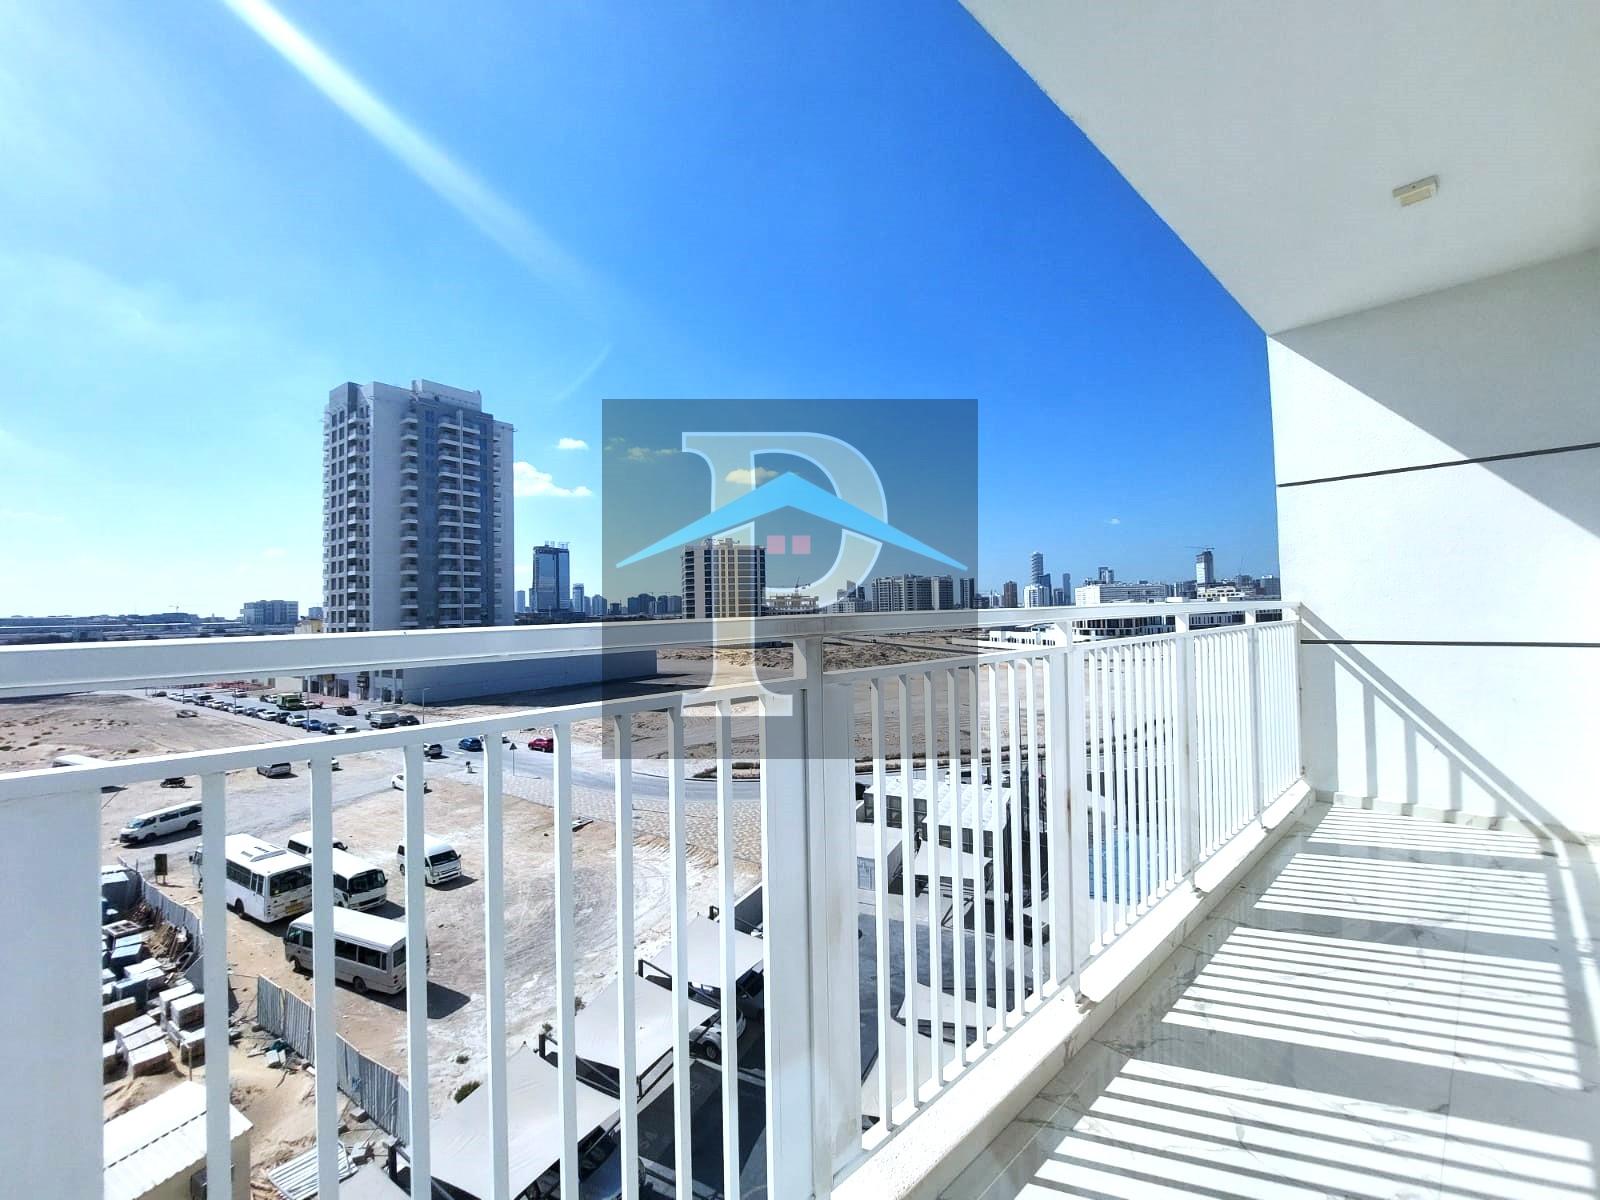 2 bed, 3 bath Apartment for rent in Geepas Tower, Arjan, Dubai for price AED 83000 yearly 